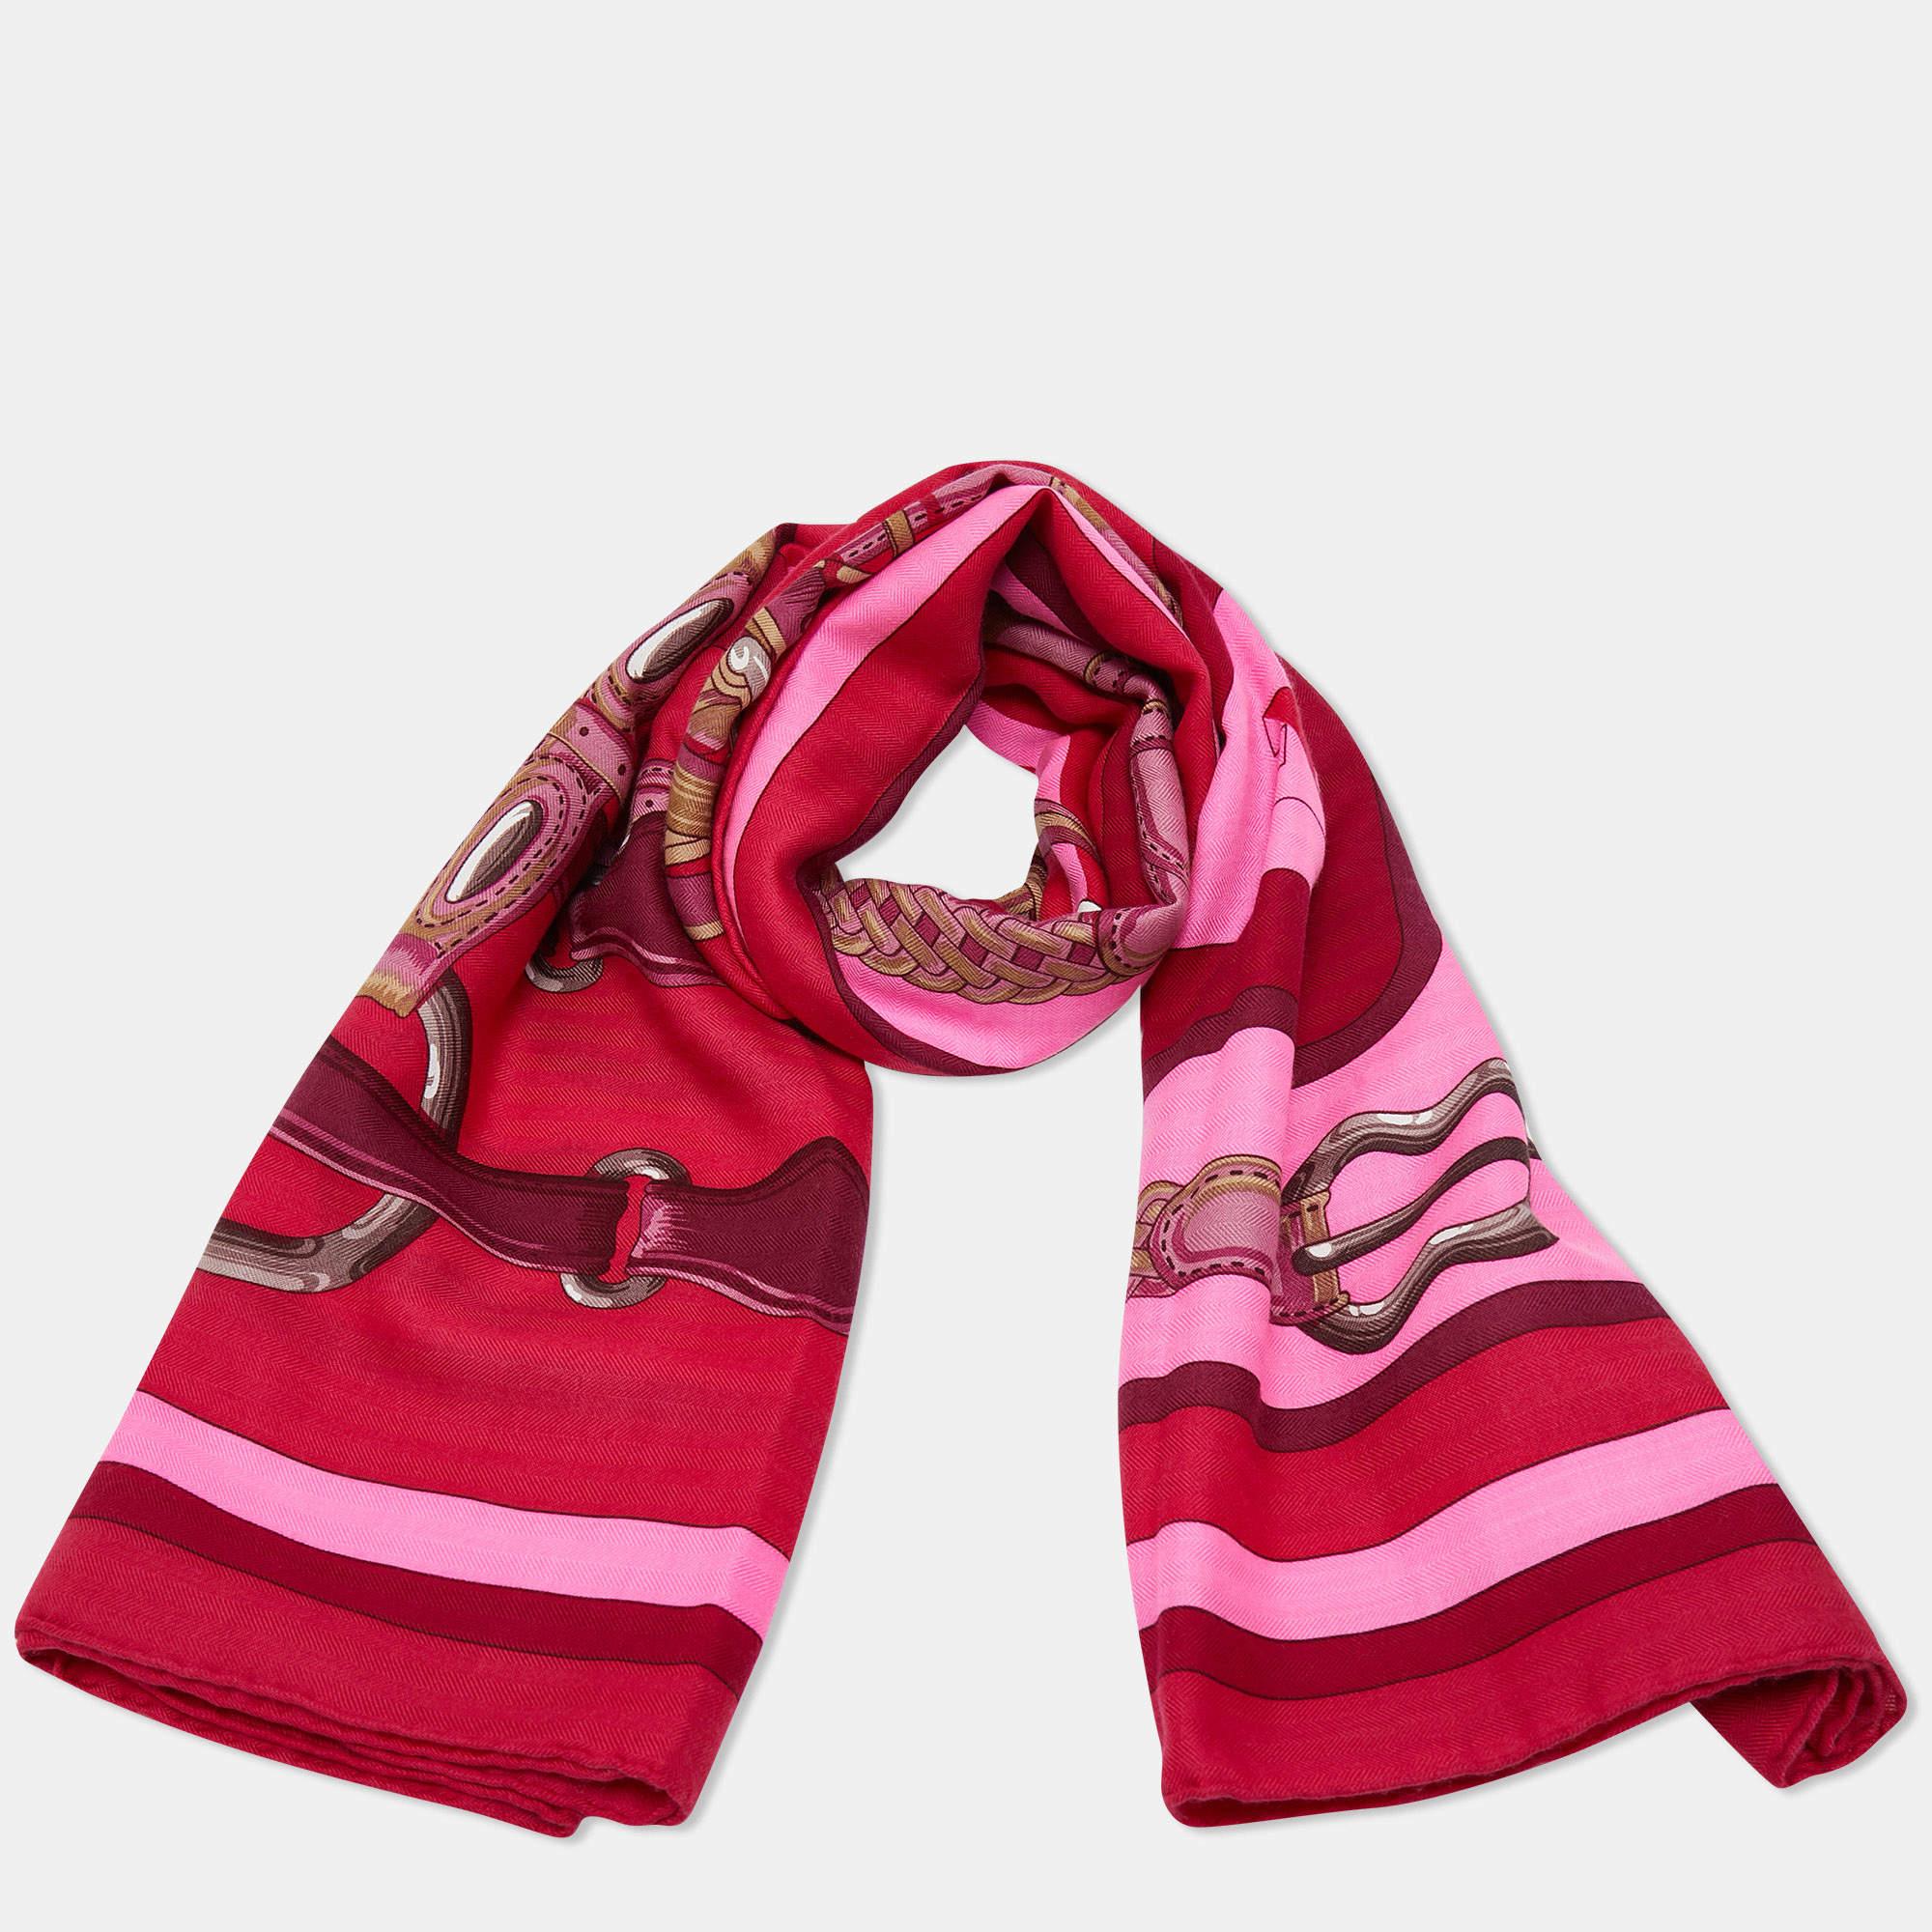 The Hermès shawl is a luxurious and exquisite accessory. Made from a blend of high-quality cashmere and silk, it features a pink color with a unique coaching design. The shawl is generously sized, allowing for various styling options, and provides a